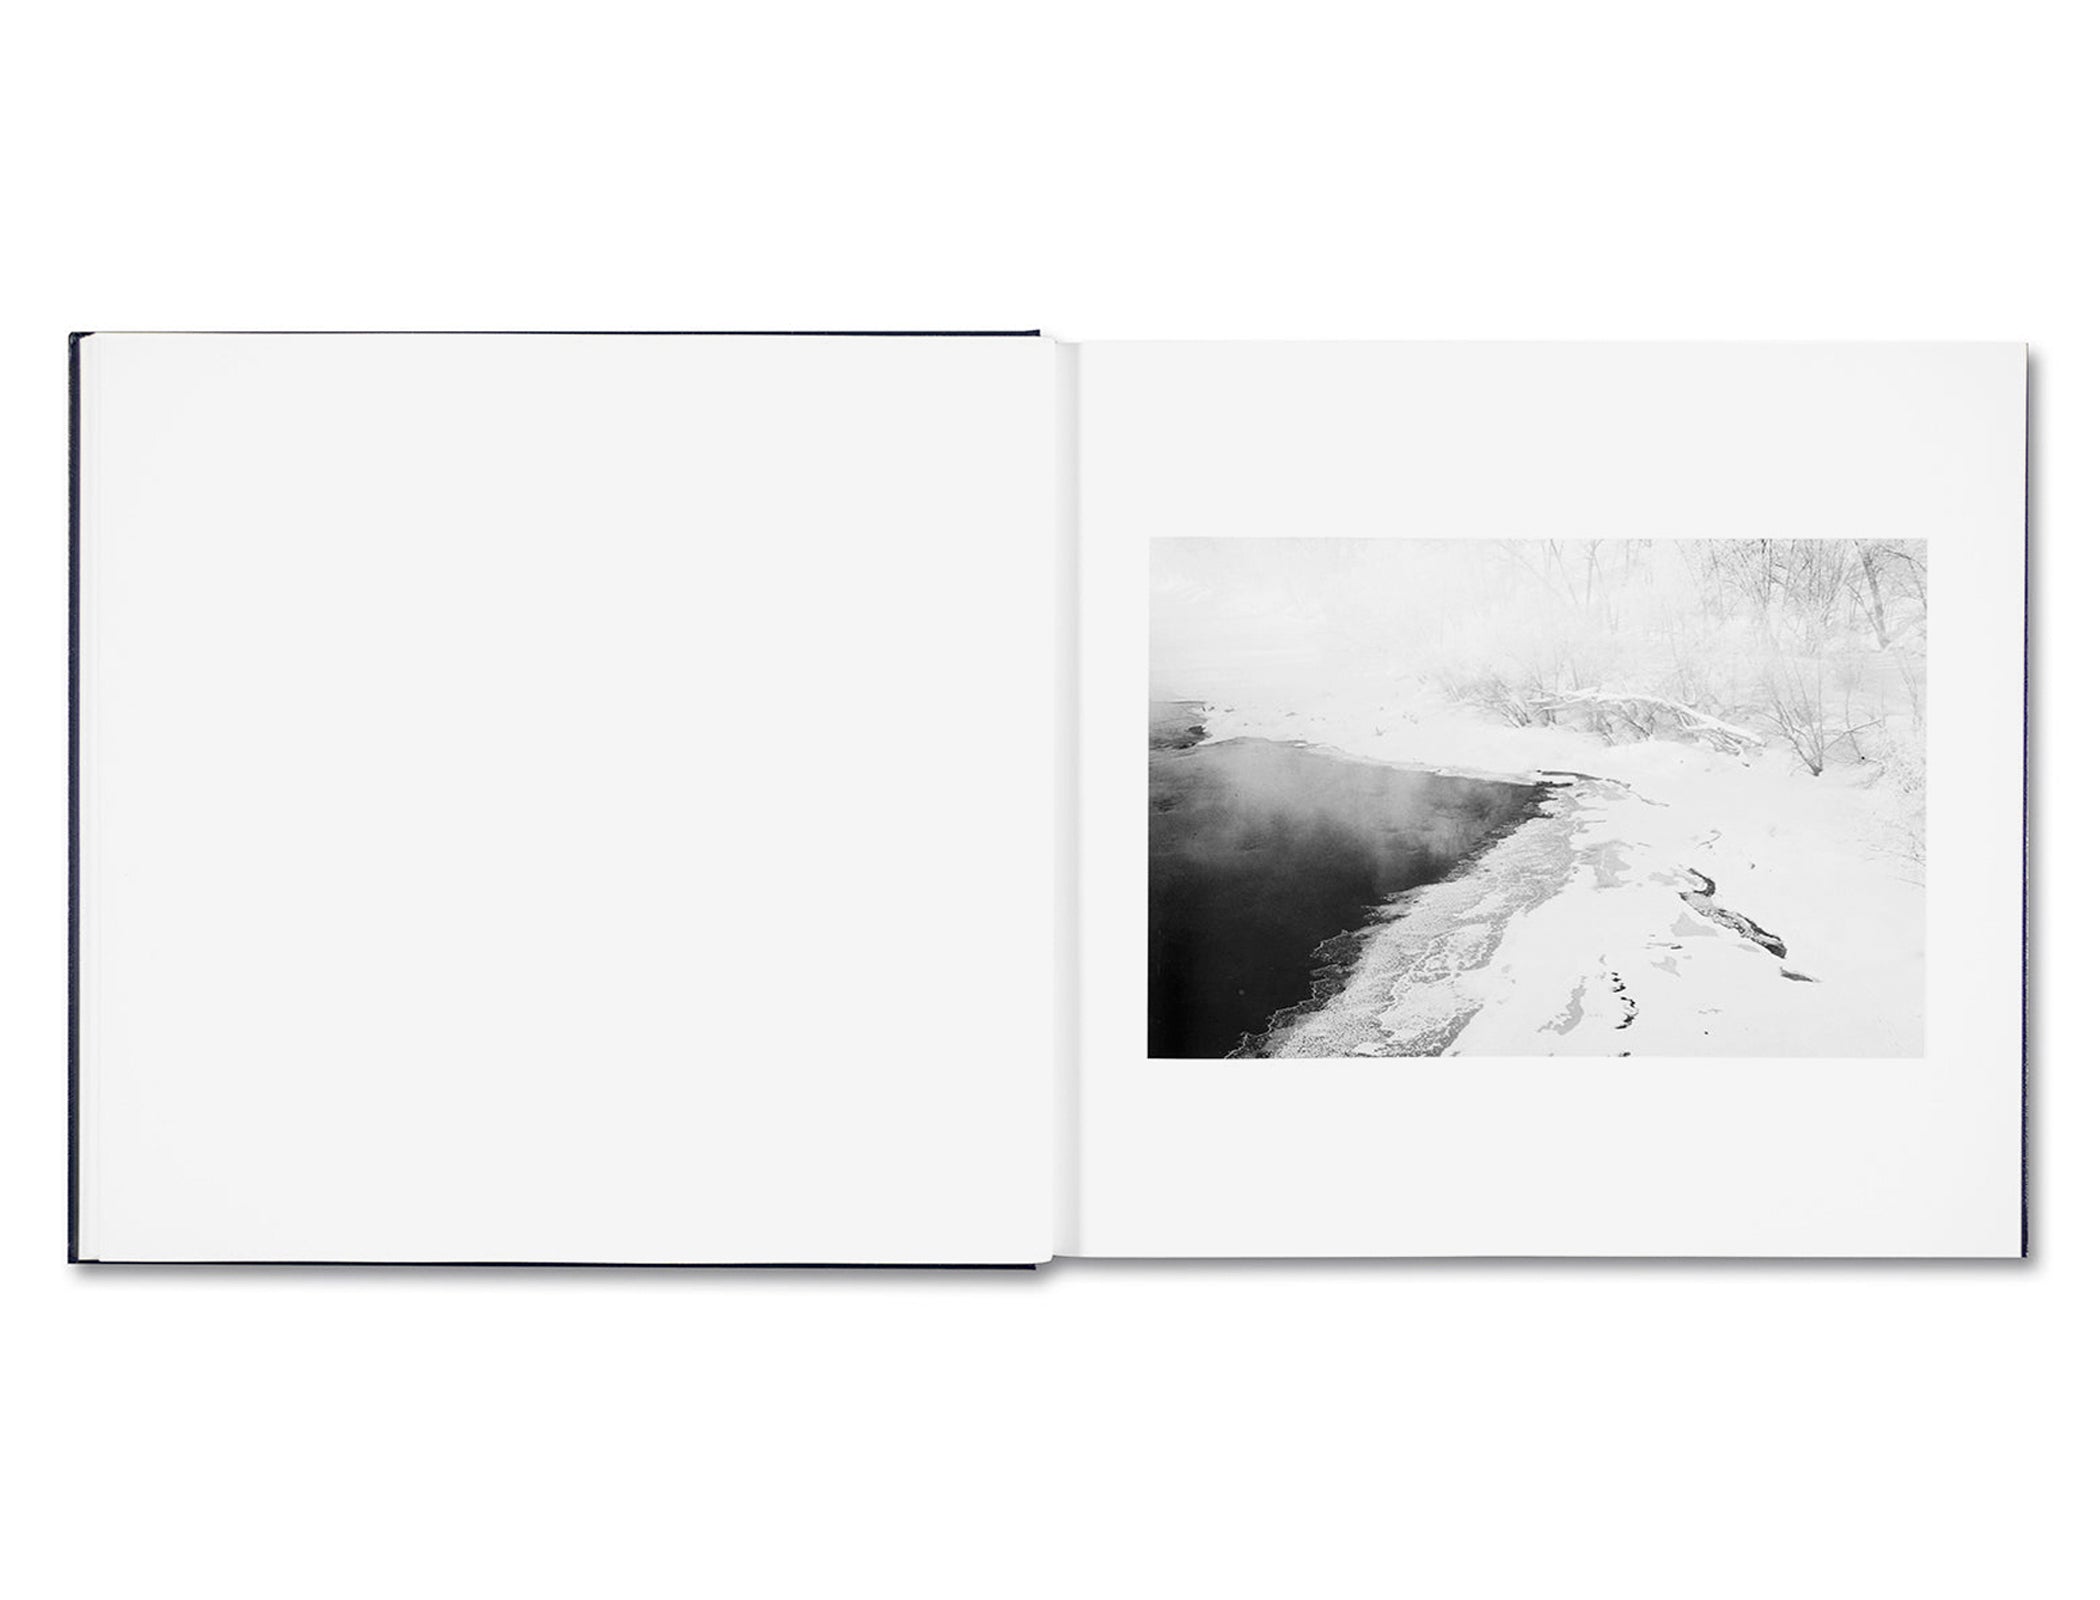 SOME SAY ICE by Alessandra Sanguinetti